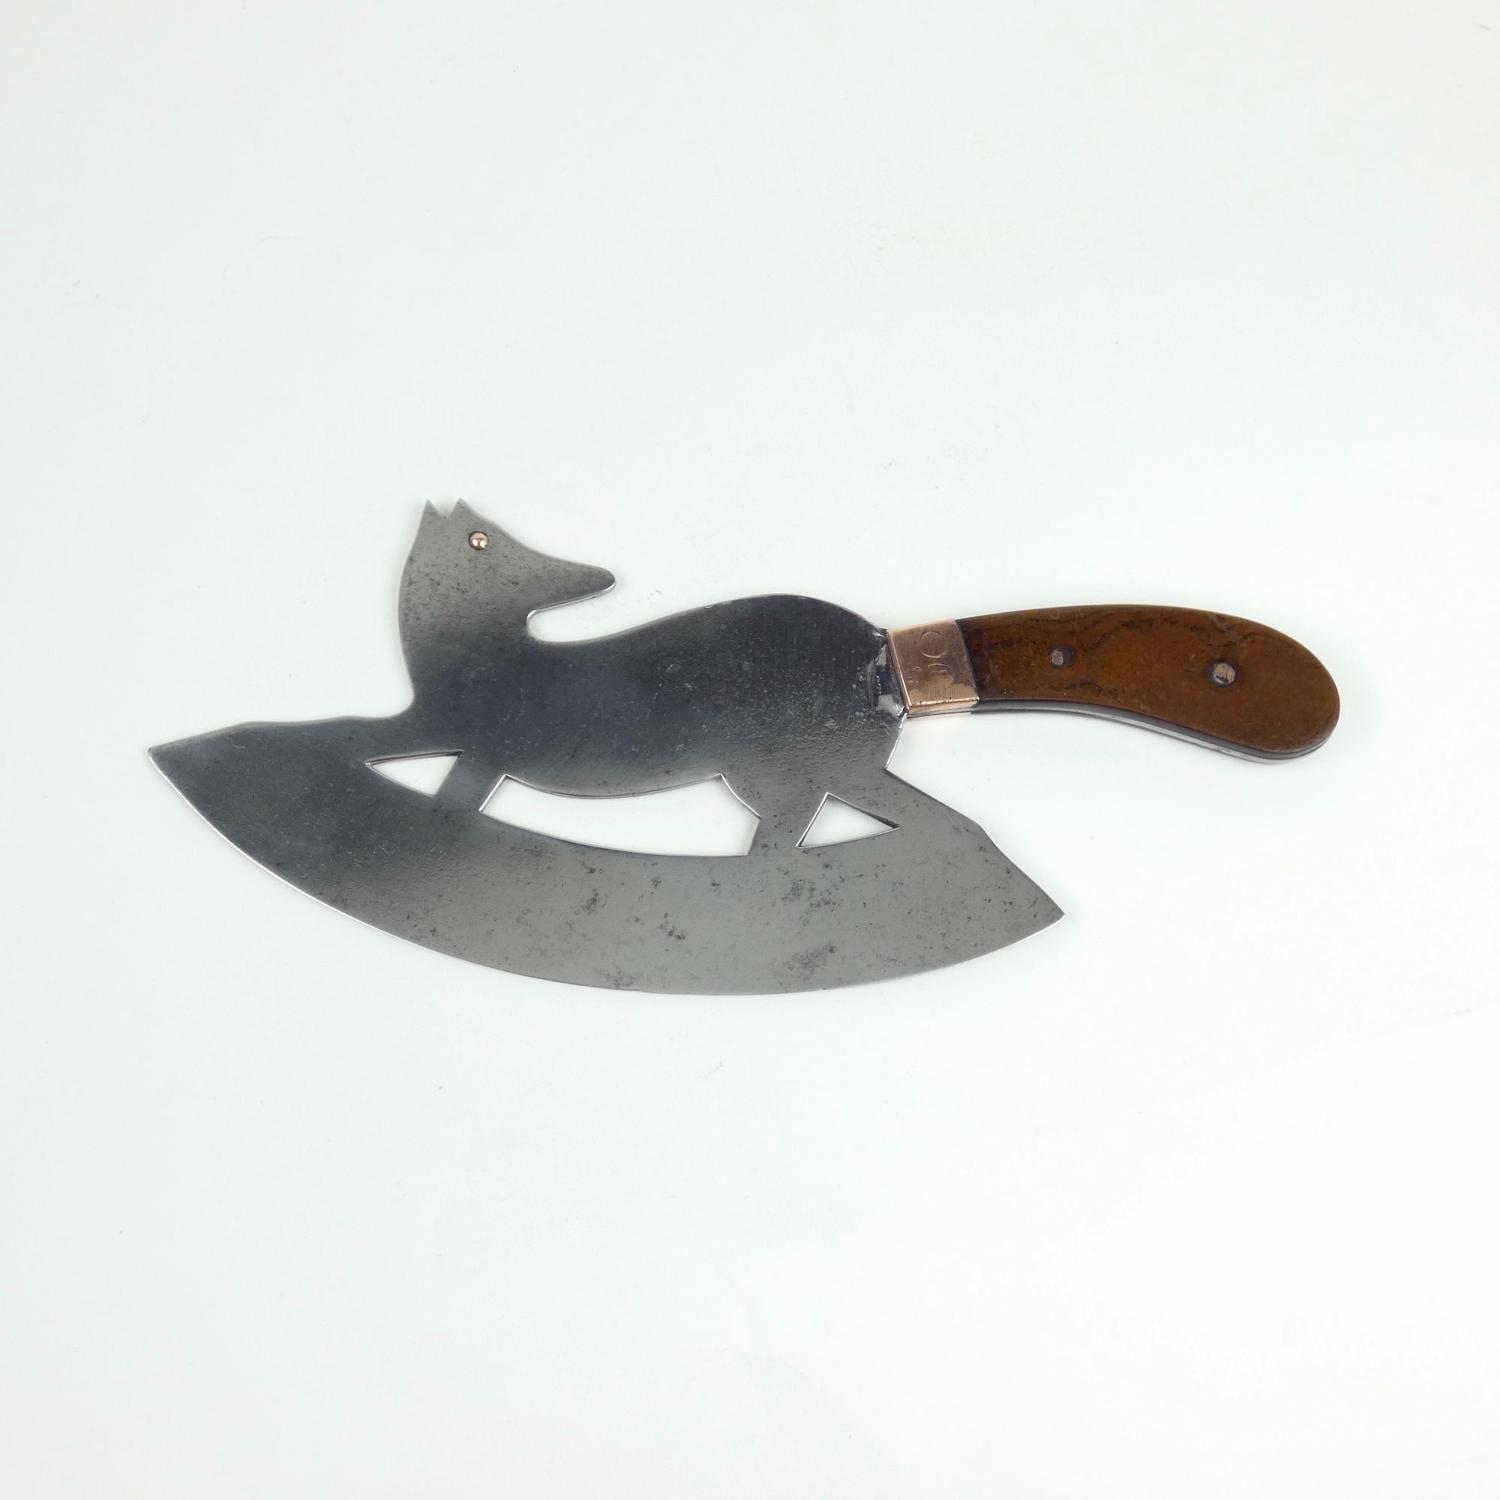 Fox shaped ice cleaver